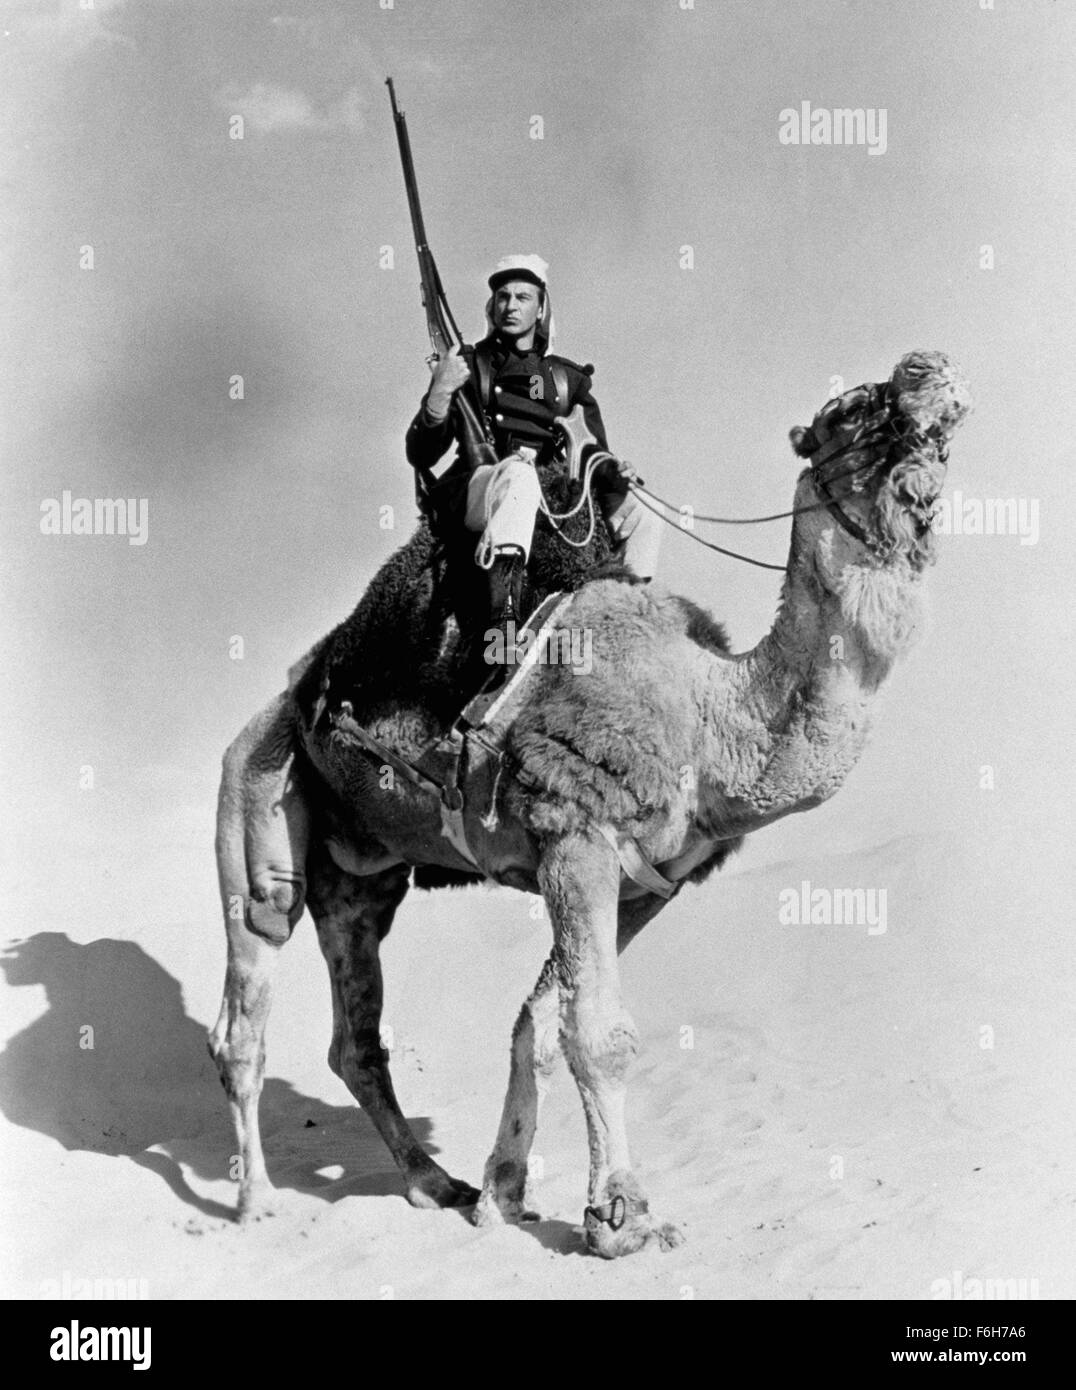 1939, Film Title: BEAU GESTE, Director: WILLIAM WELLMAN, Studio: PARAMOUNT, Pictured: CAMEL, CLOTHING, GARY COOPER, FOREIGN LEGION UNIFORM, RIFLE, WEAPONS. (Credit Image: SNAP) Stock Photo